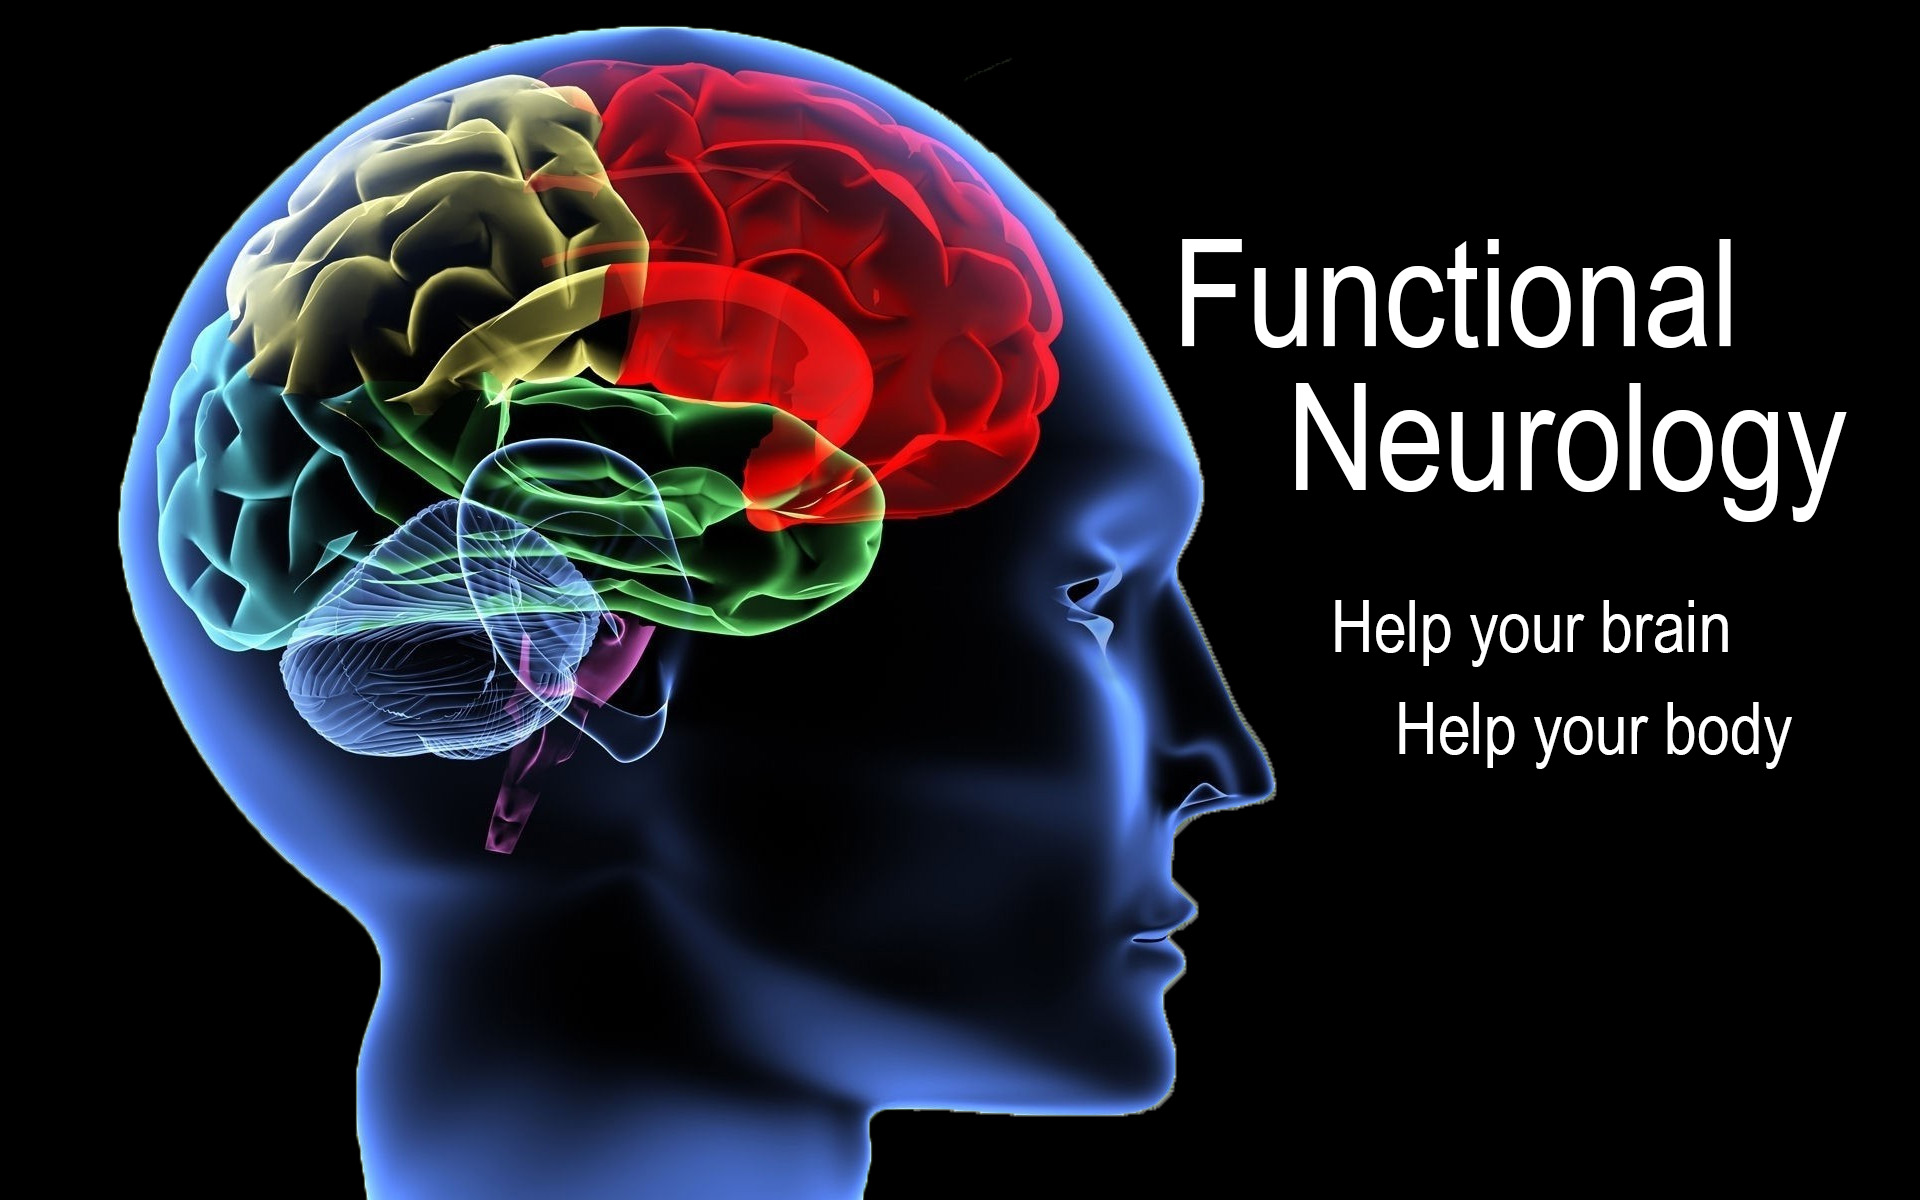 About Functional Neurology